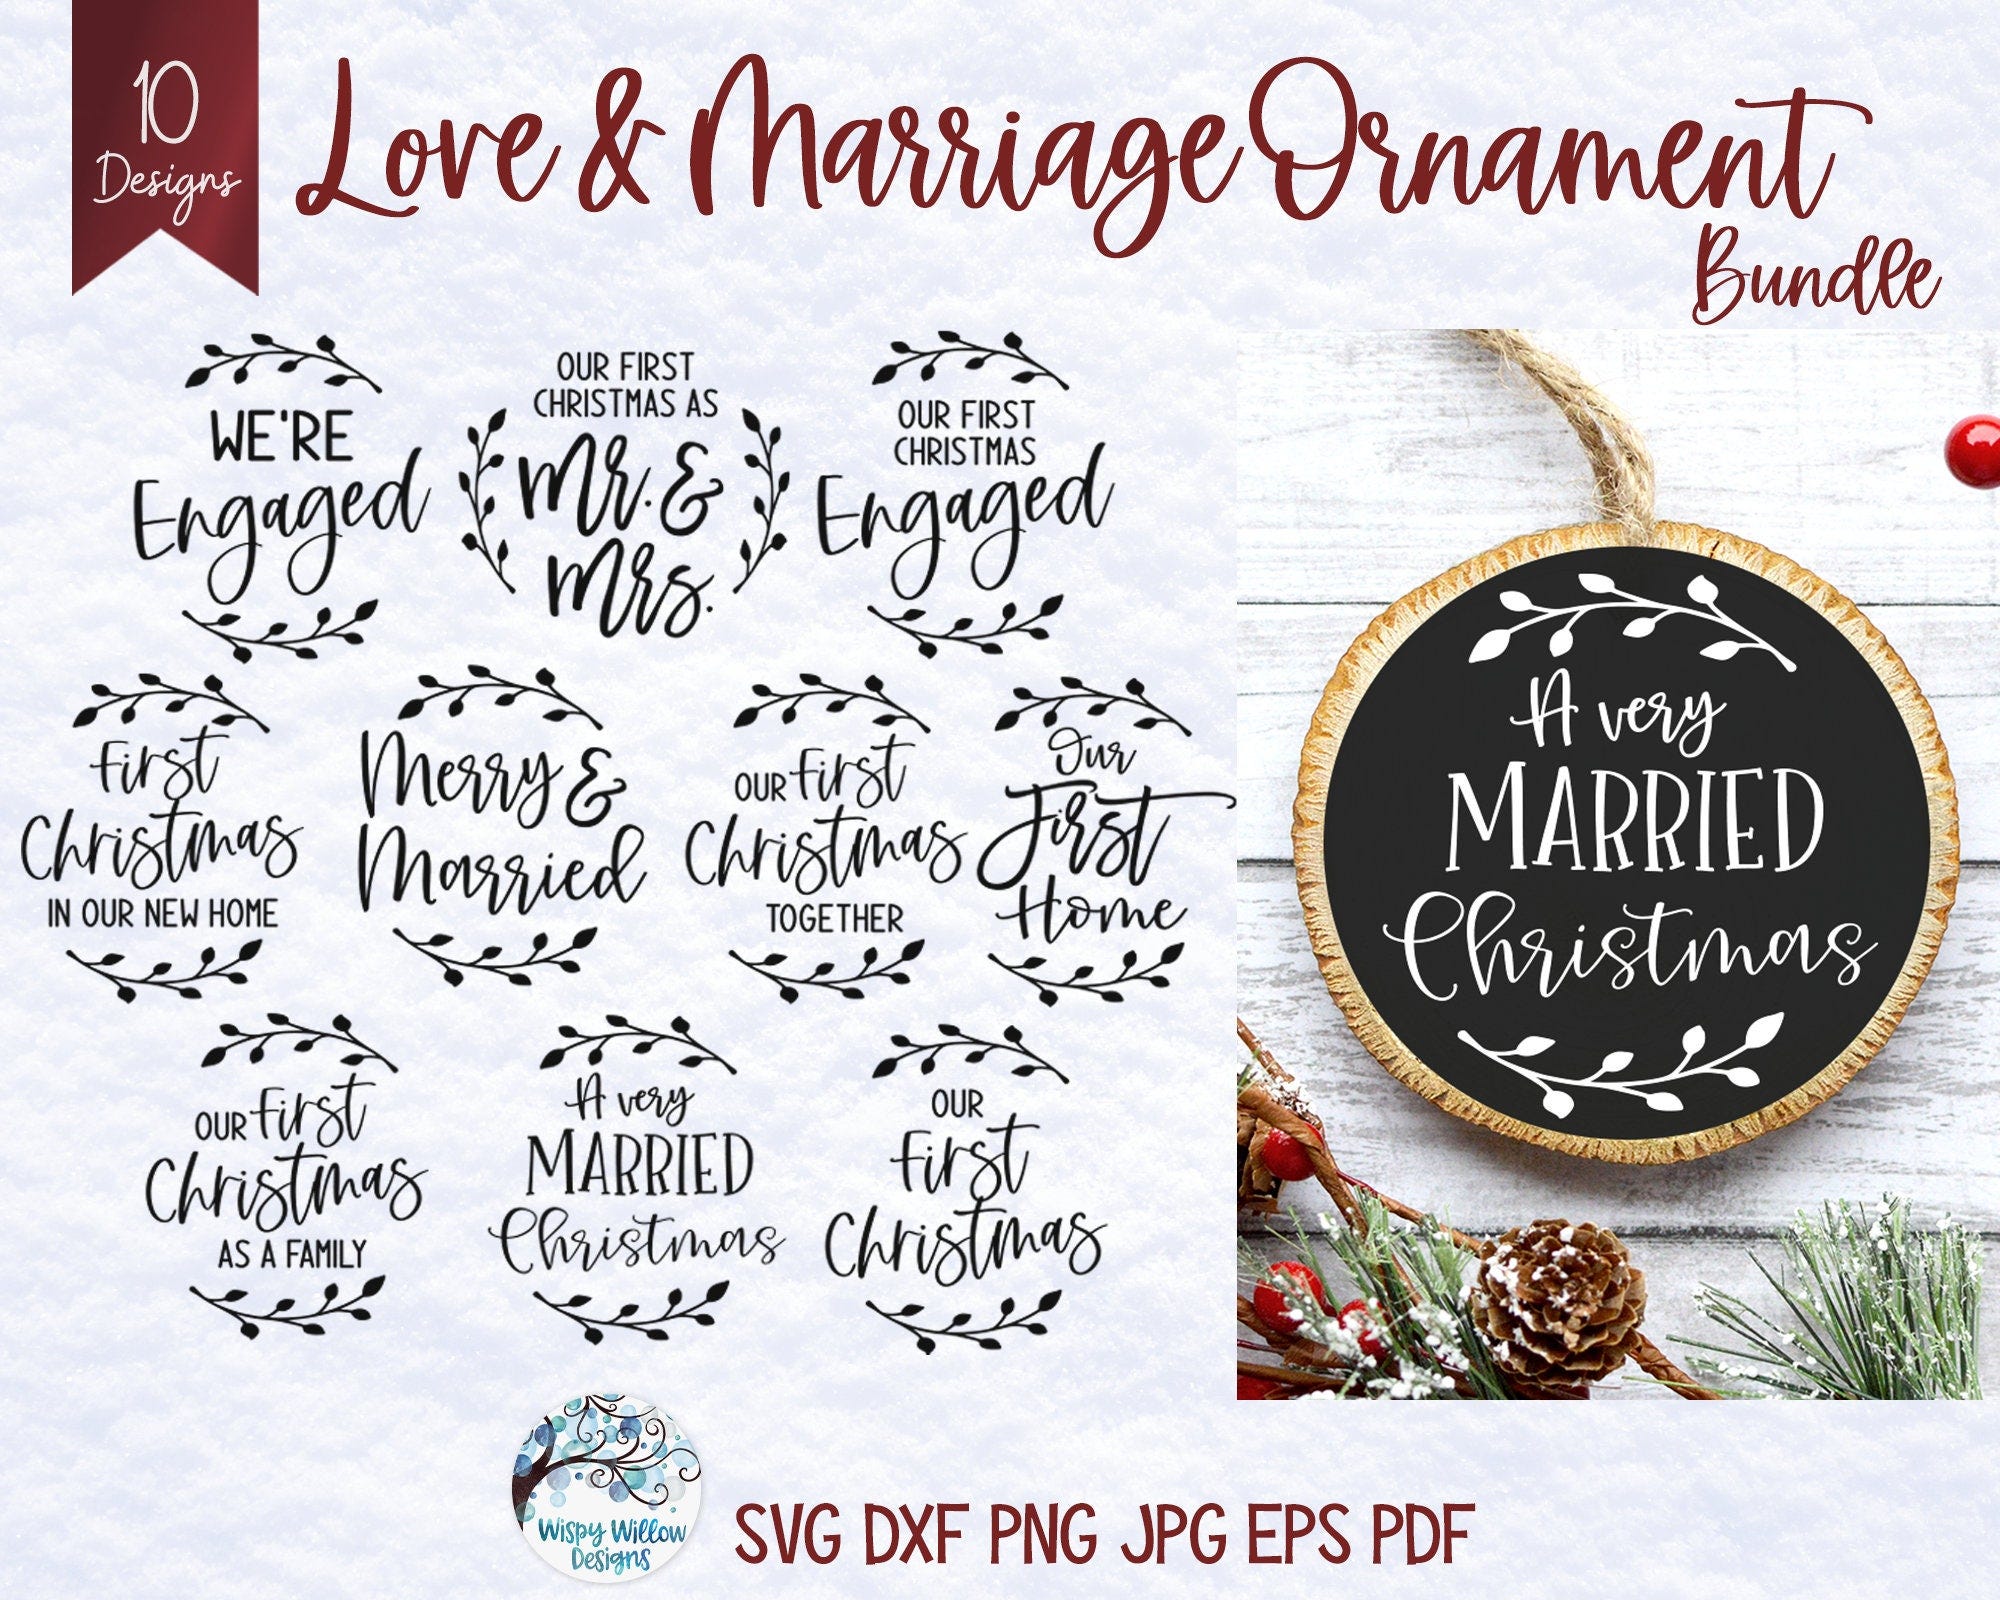 Christmas Ornament SVG Bundle, Love and Marriage Ornaments, Farmhouse Christmas Ornament, Engaged, Mr and Mrs, Married, Our First Christmas